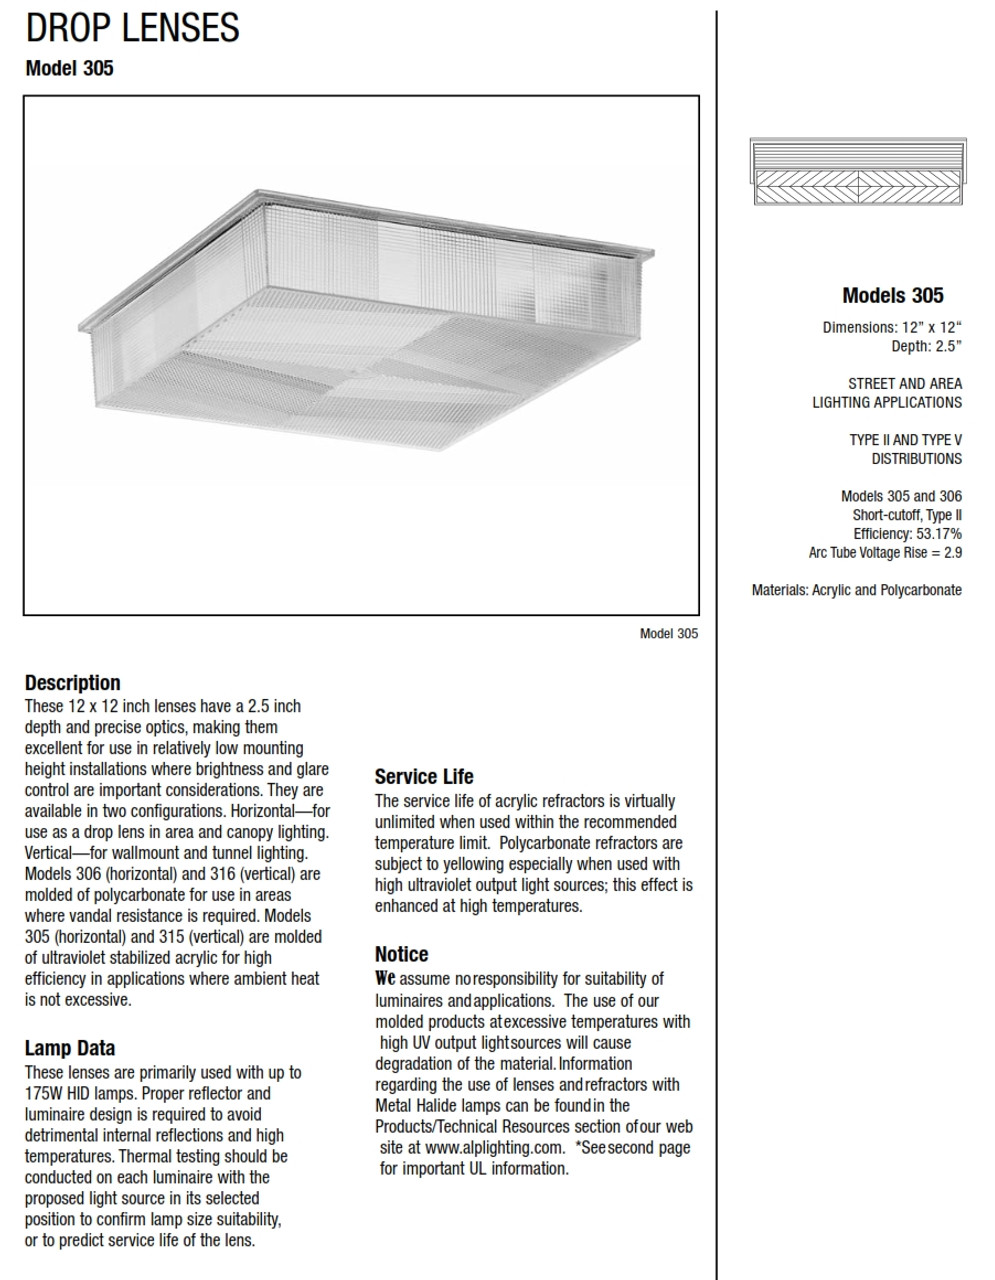 LEX-305-A  12" x 12" Acrylic Lens Replacement for Canopy Fixtures